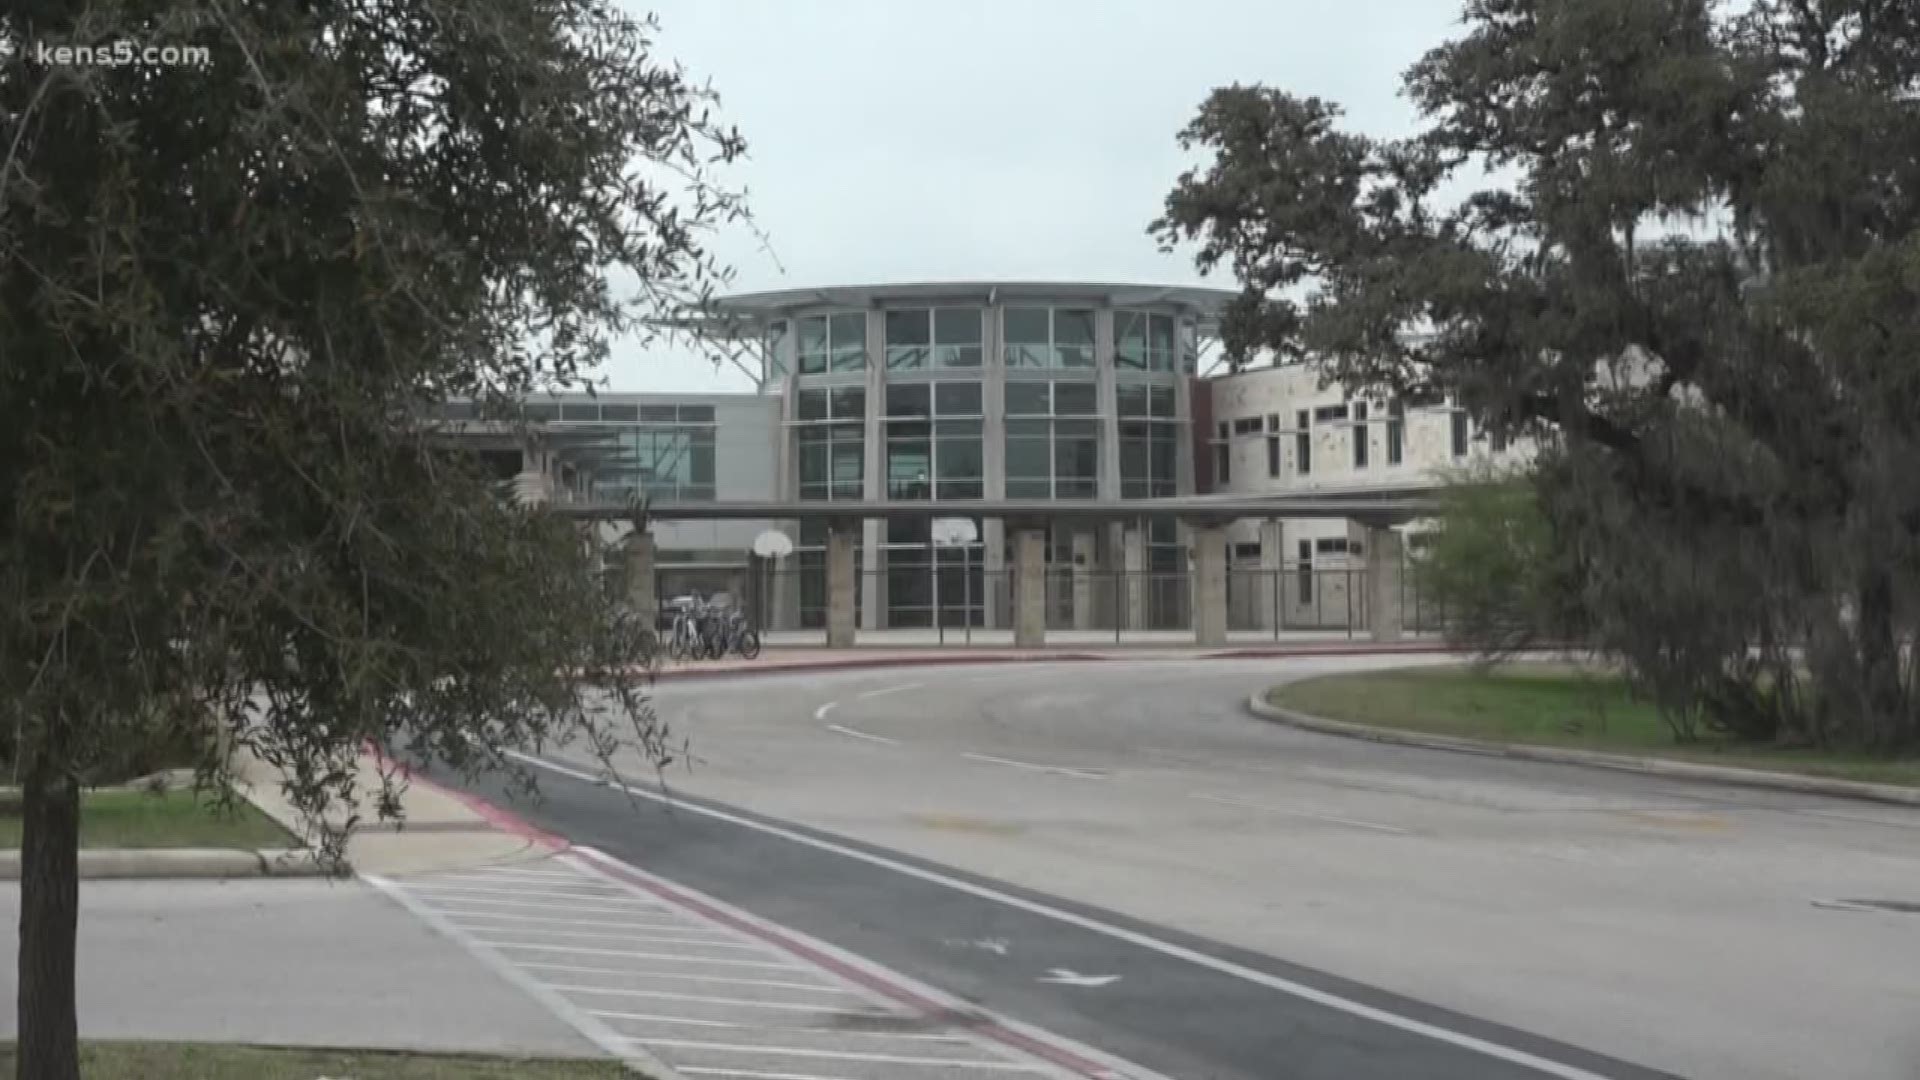 This is the first known lawsuit to be filed under David’s Law: the Texas legislation passed in honor of an Alamo Heights student who committed suicide after being bullied. Eyewitness News reporter Sharon Ko has the details on the lawsuit.